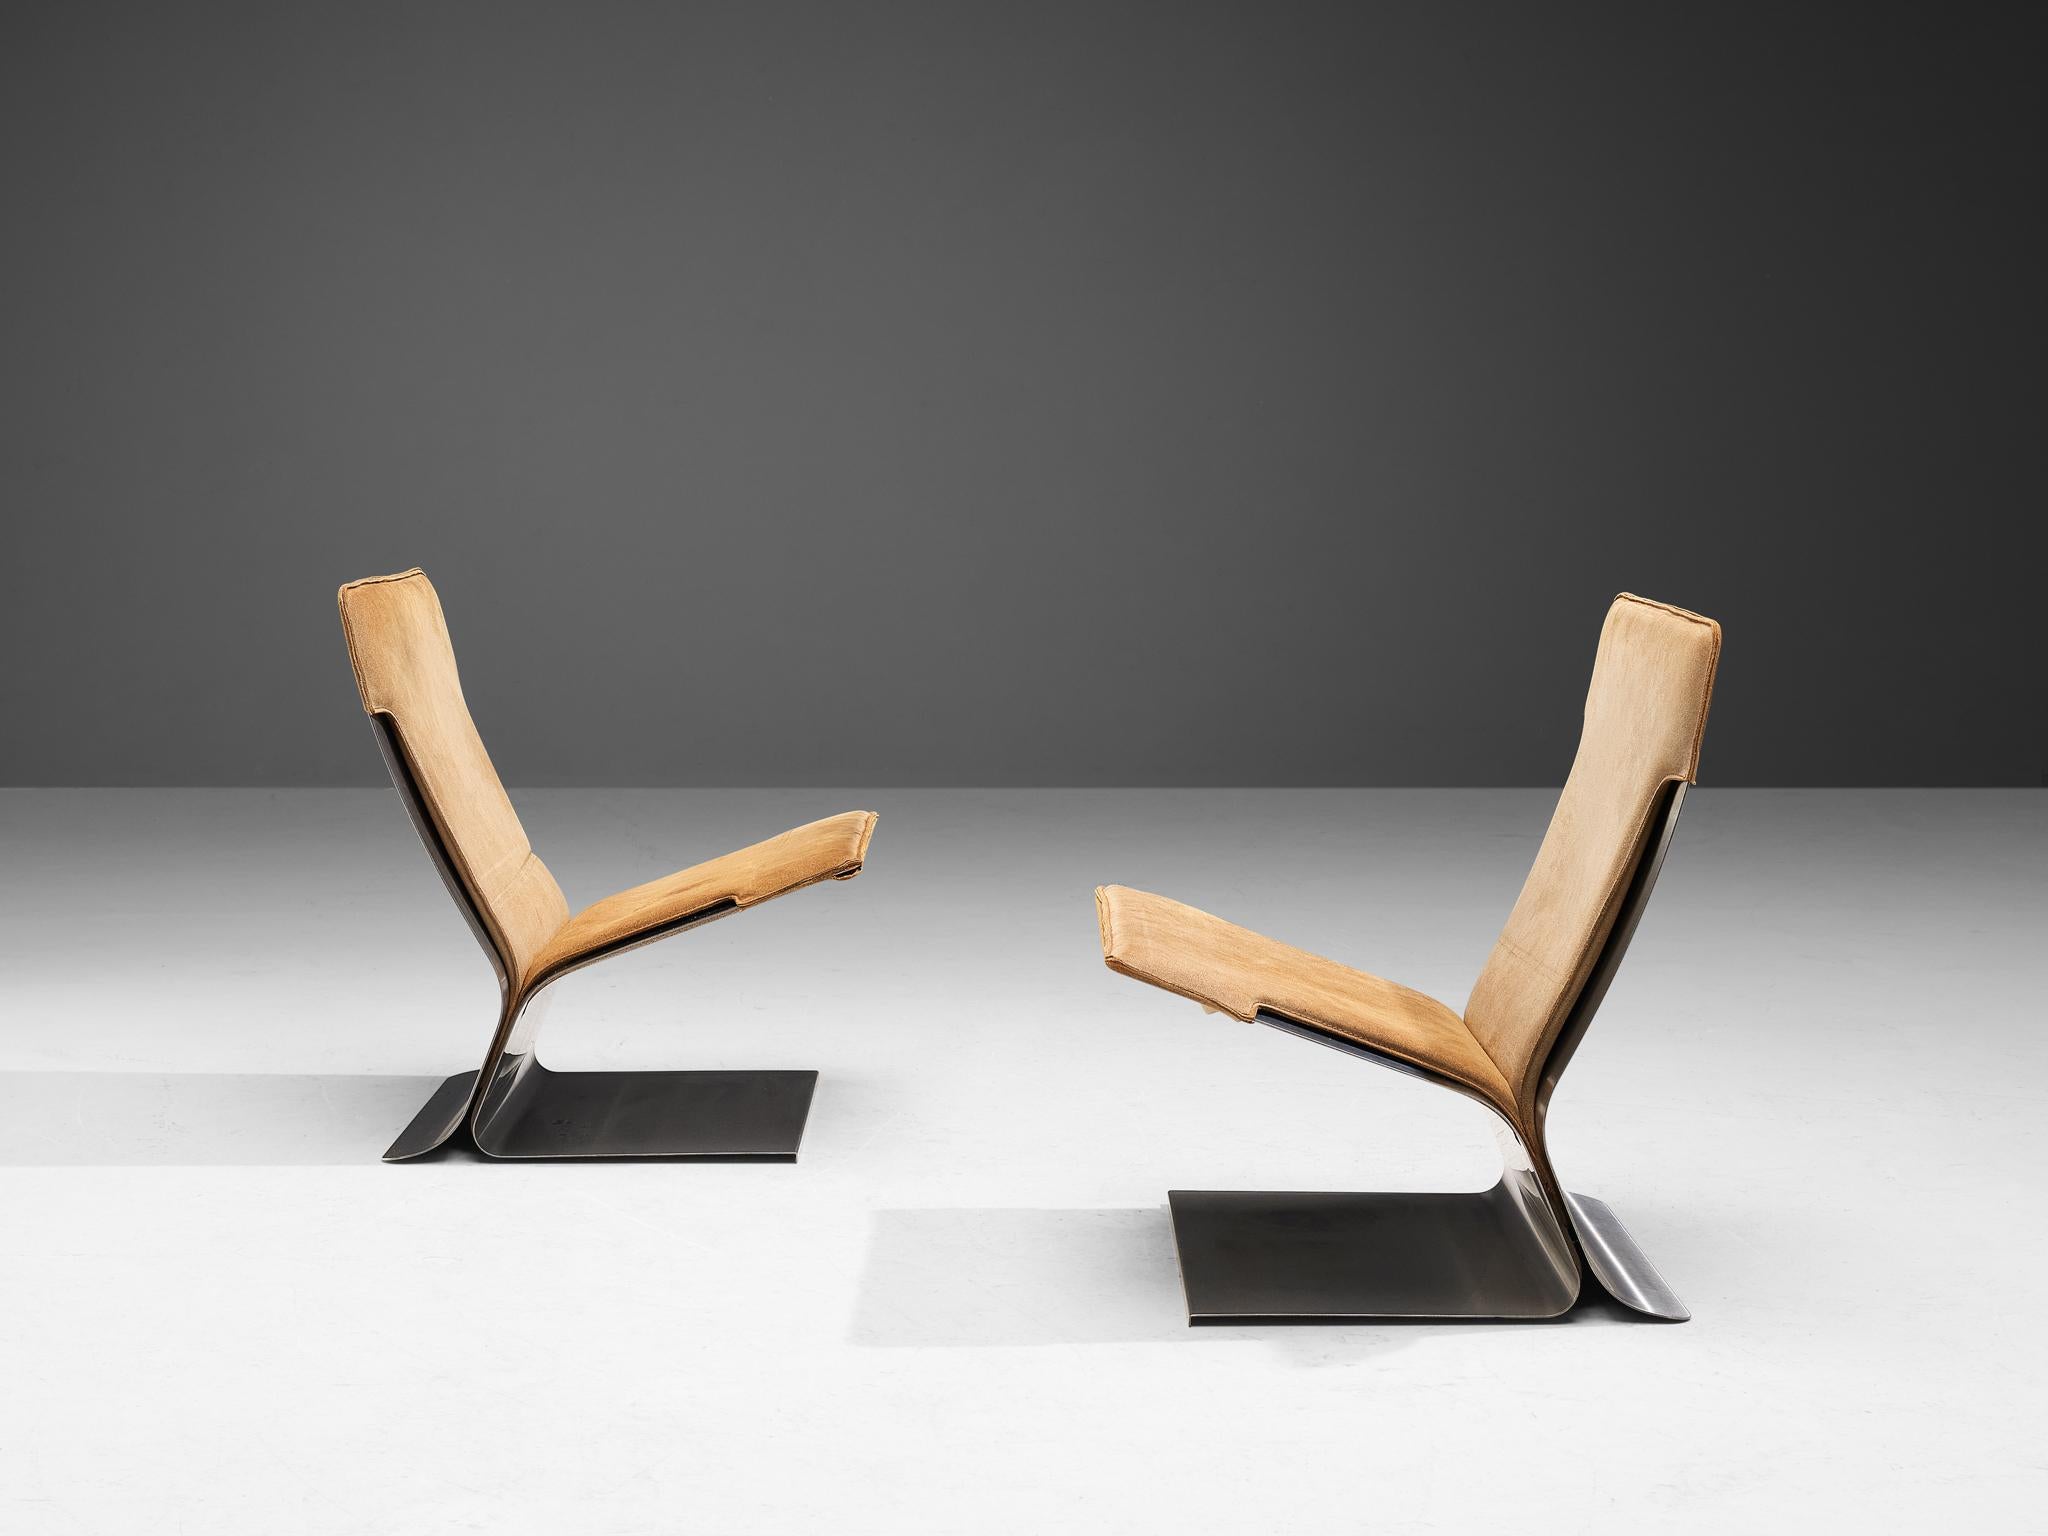 Stainless Steel Pierre Folie for Jacques Charpentier 'Chauffeuse' Pair of Lounge Chairs 